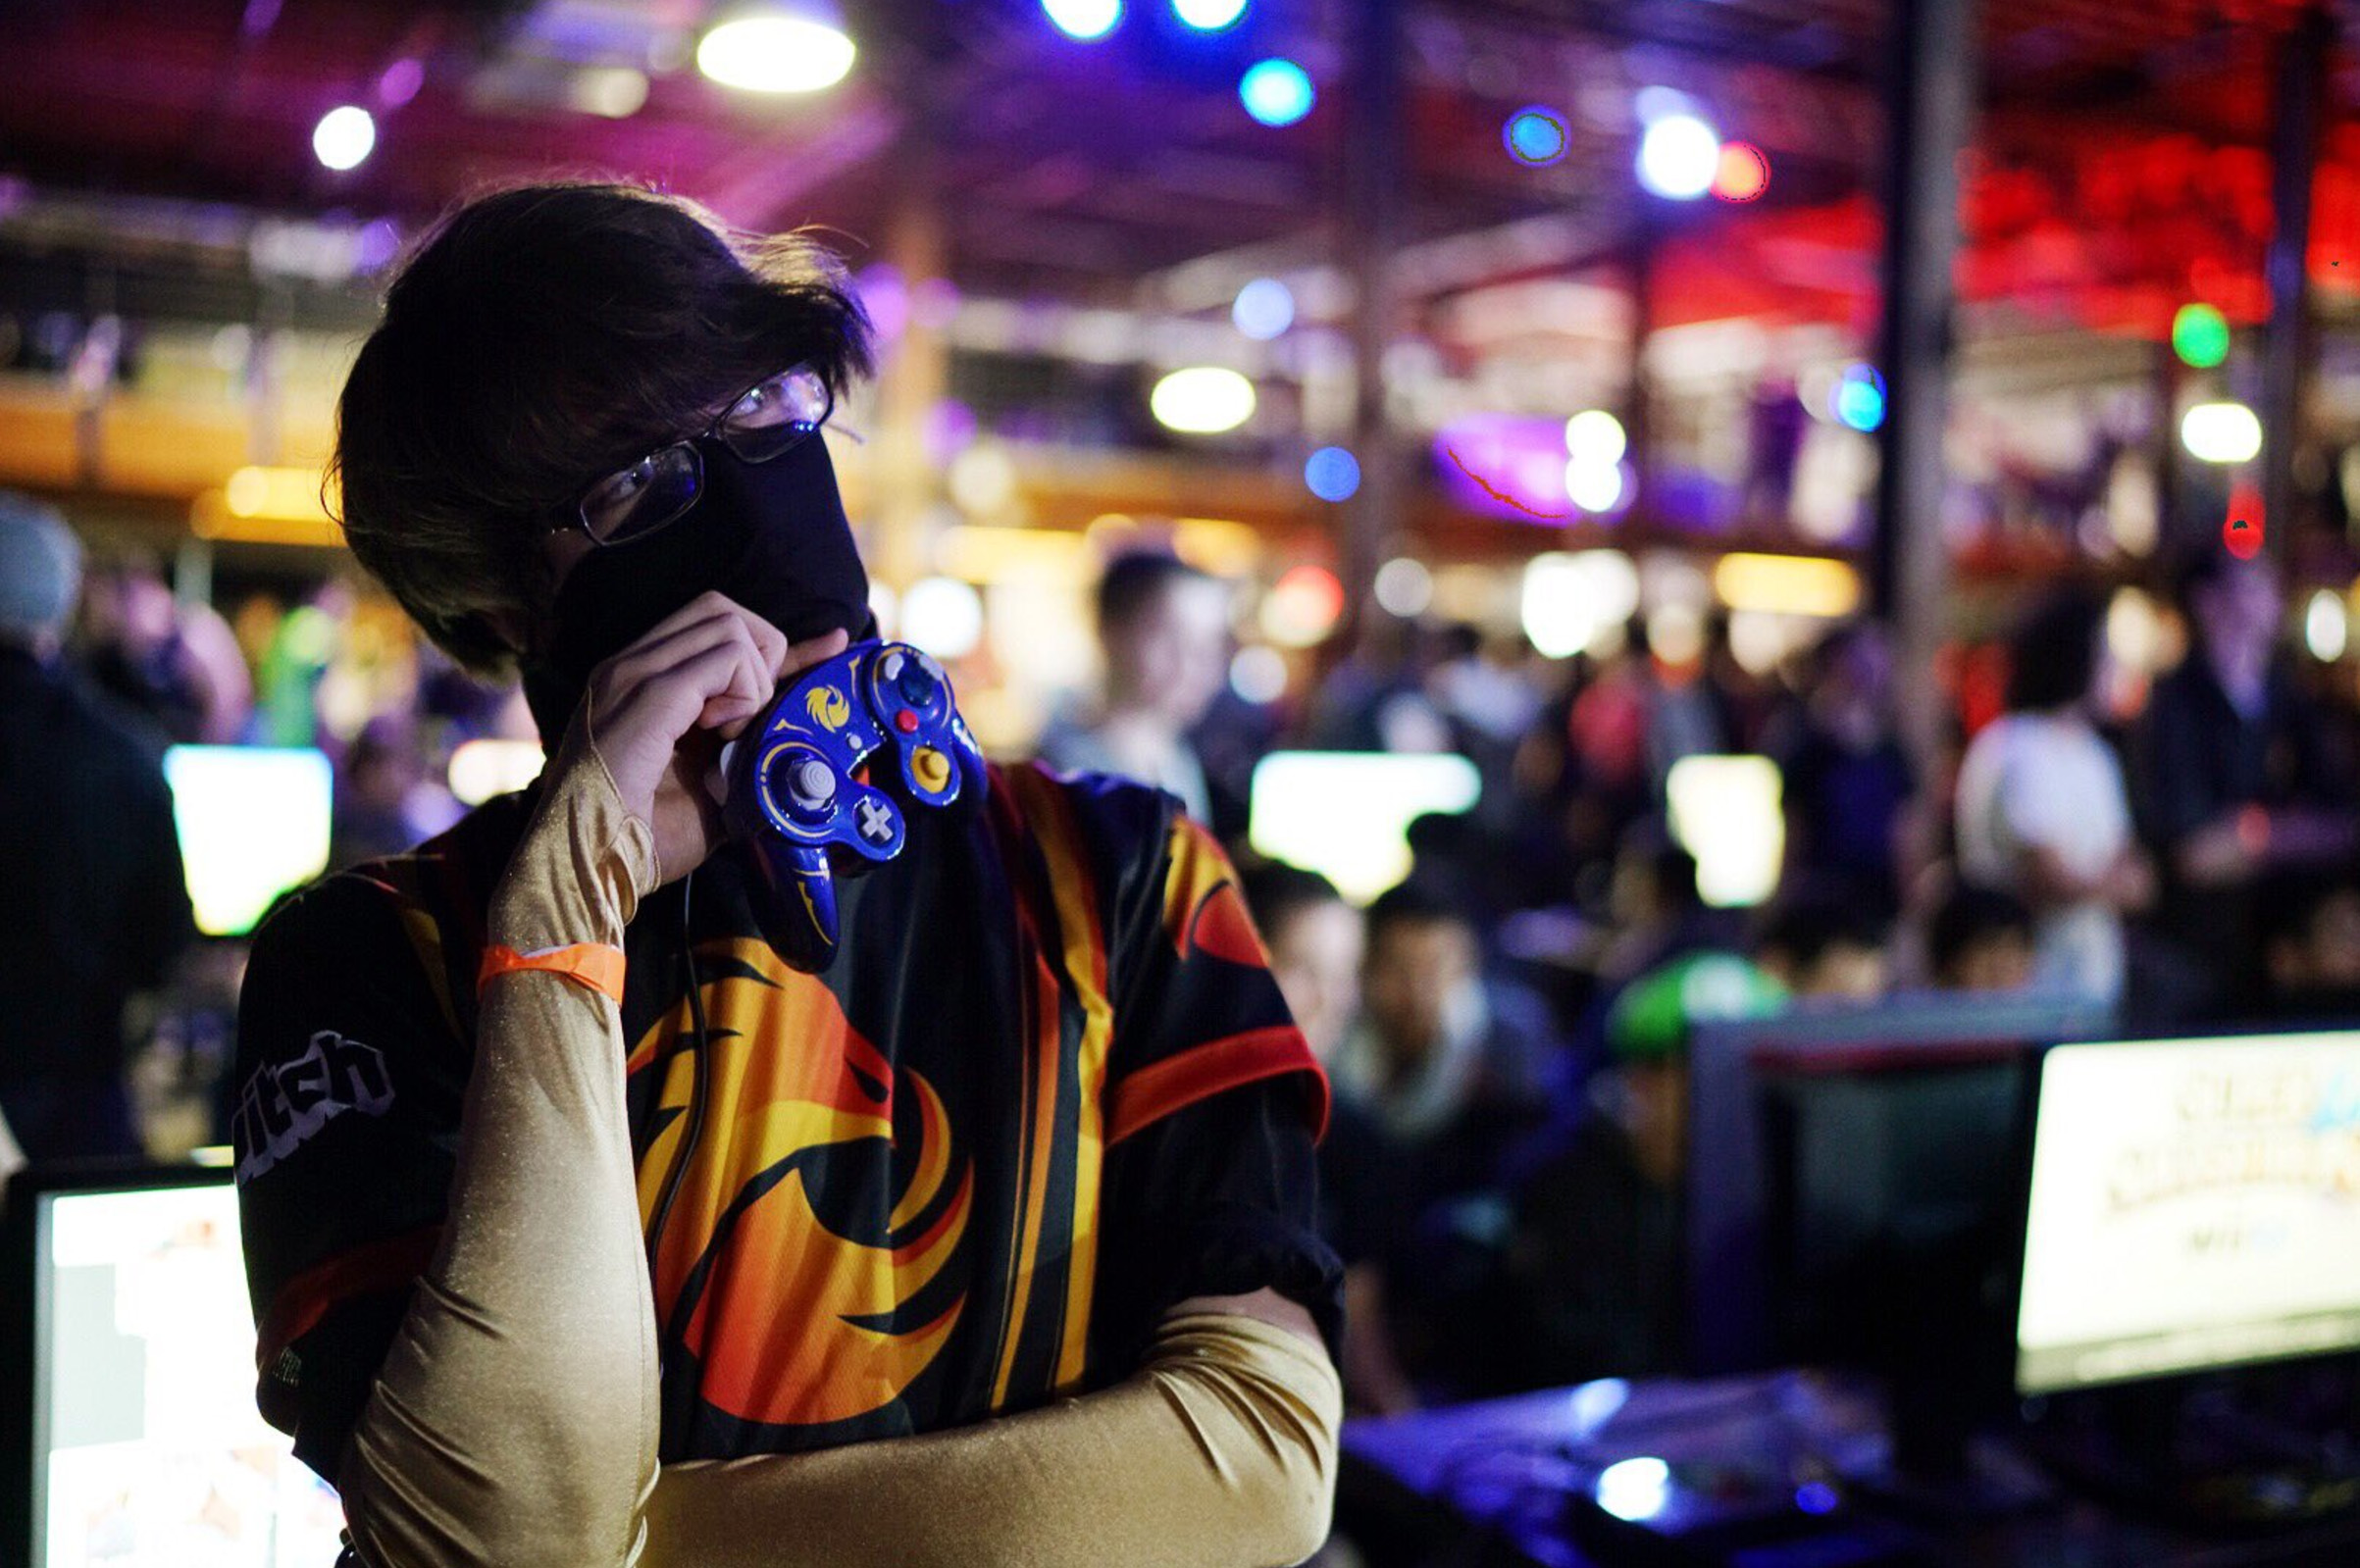 The 15-Year-Old Smash Pro Who Finds Confidence In Dancing Like Bayonetta